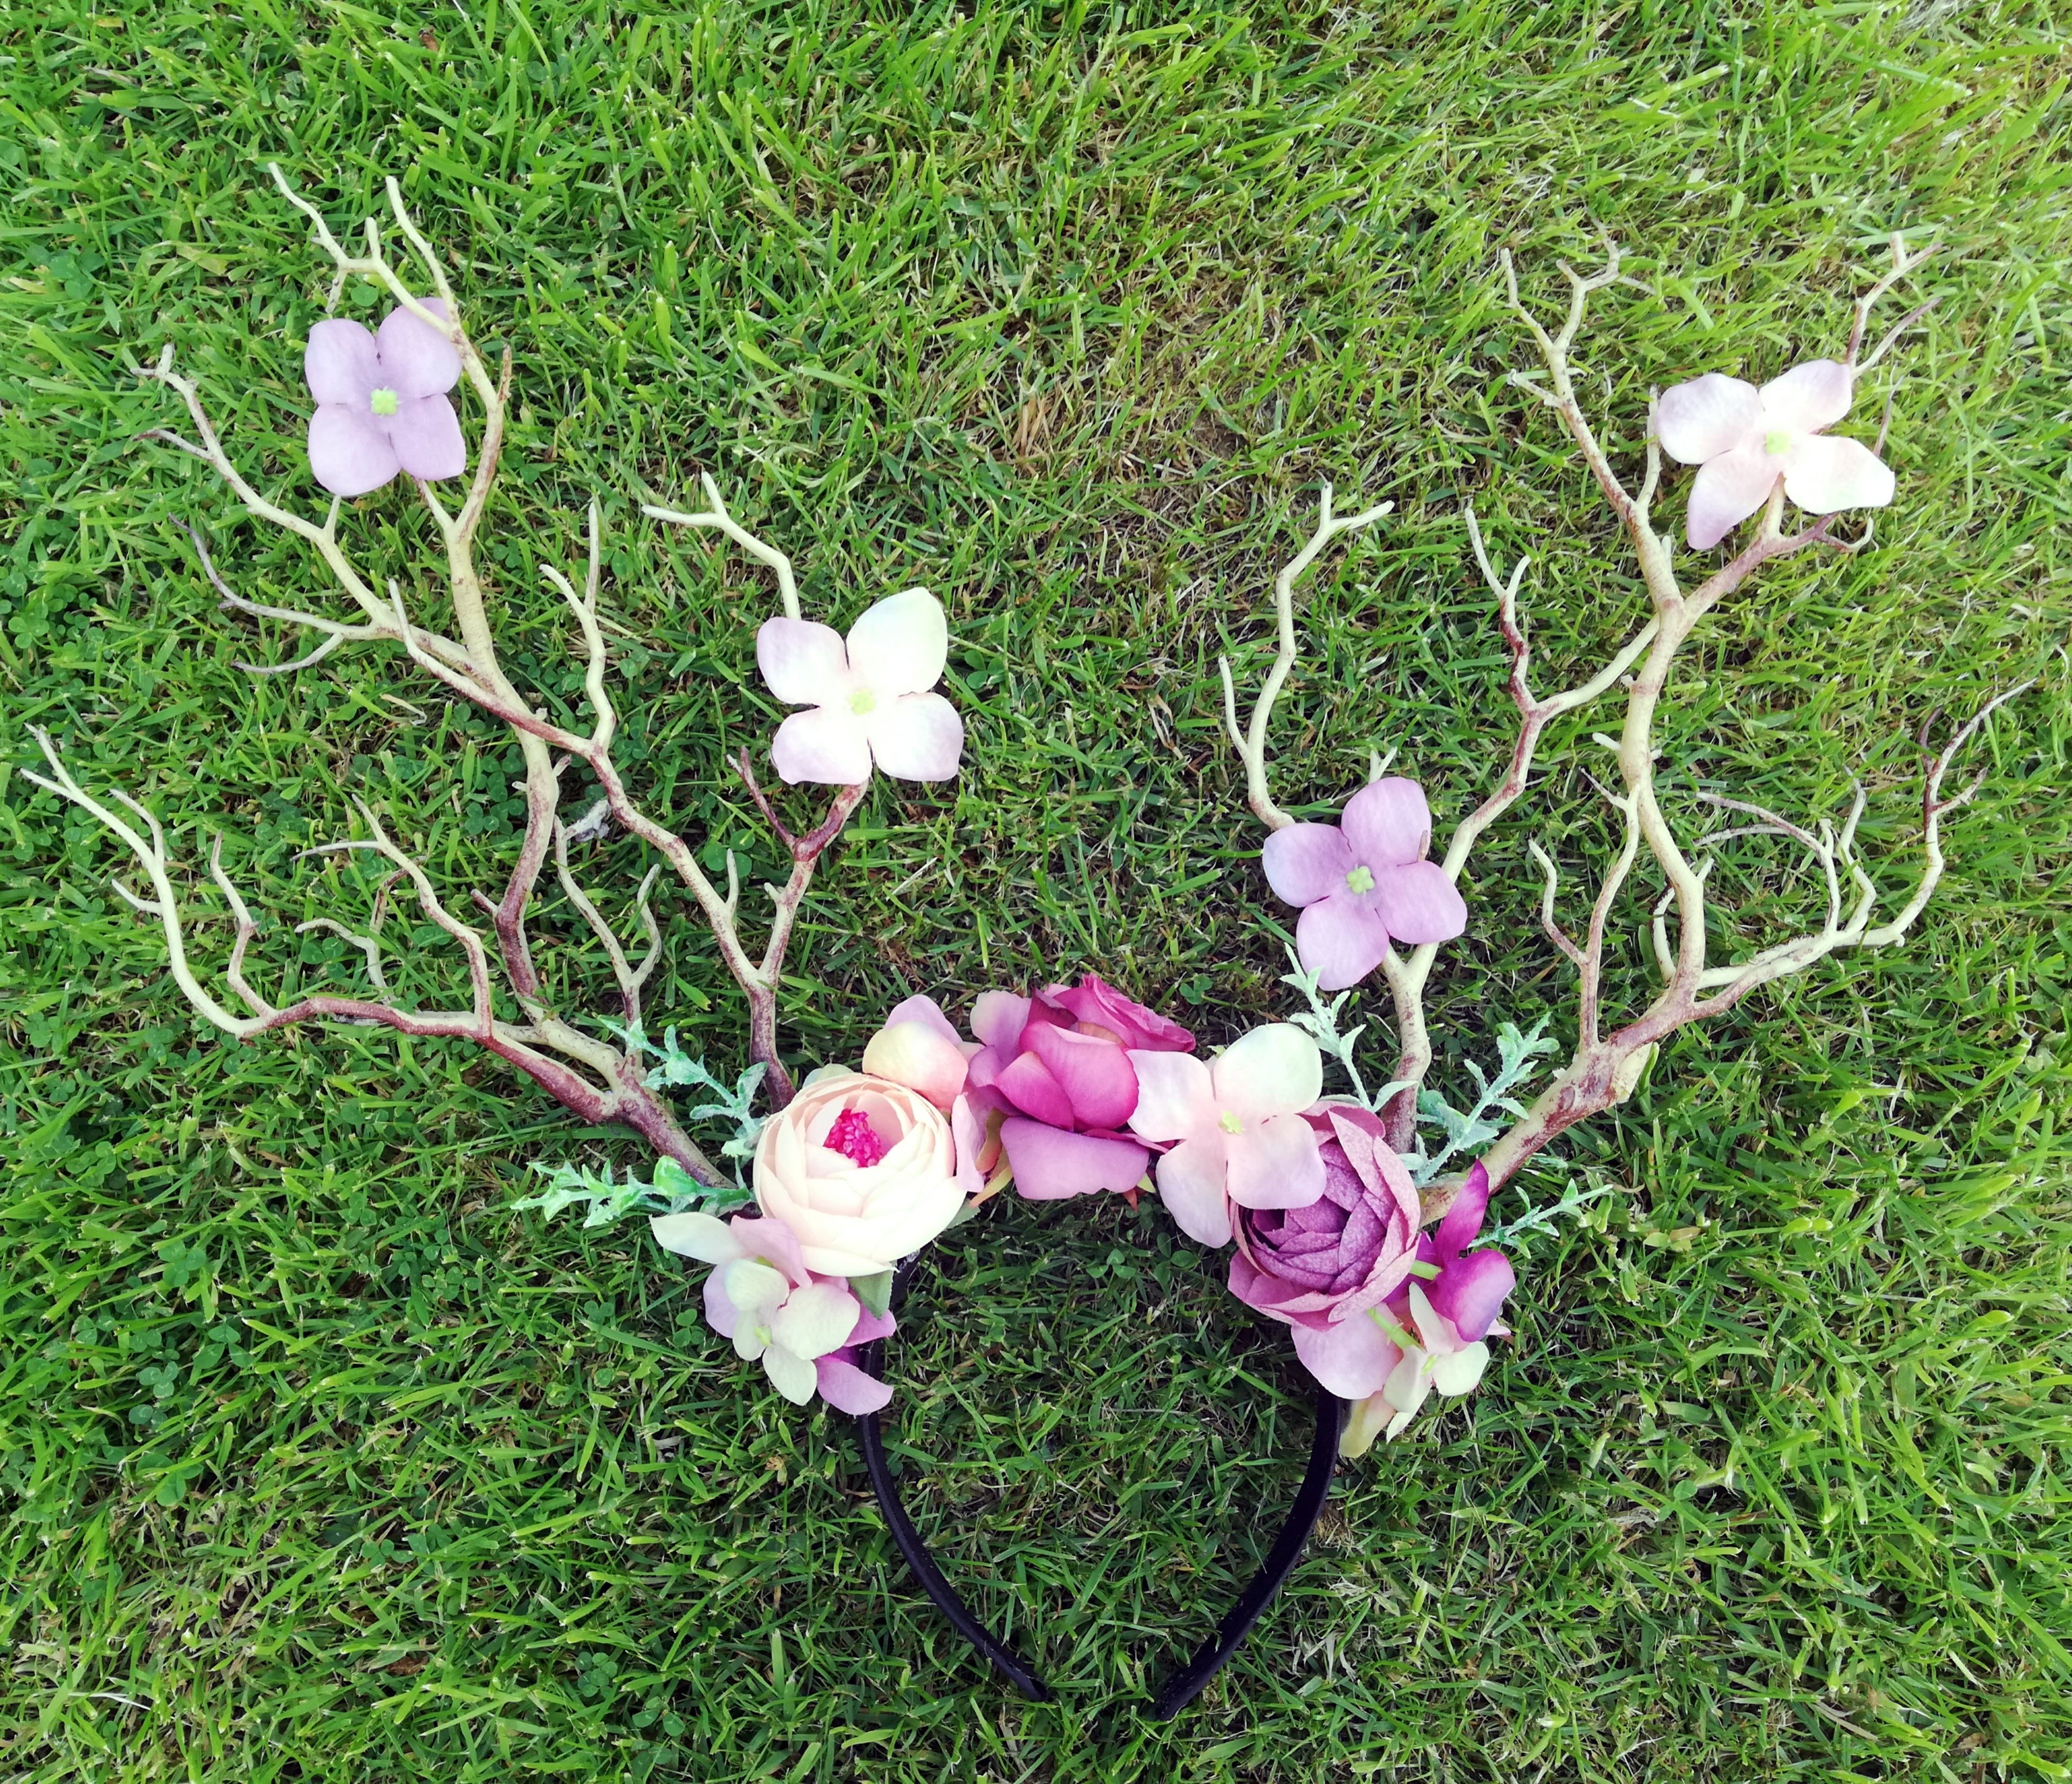 Floral Fawn Hairband - Floral Fawna